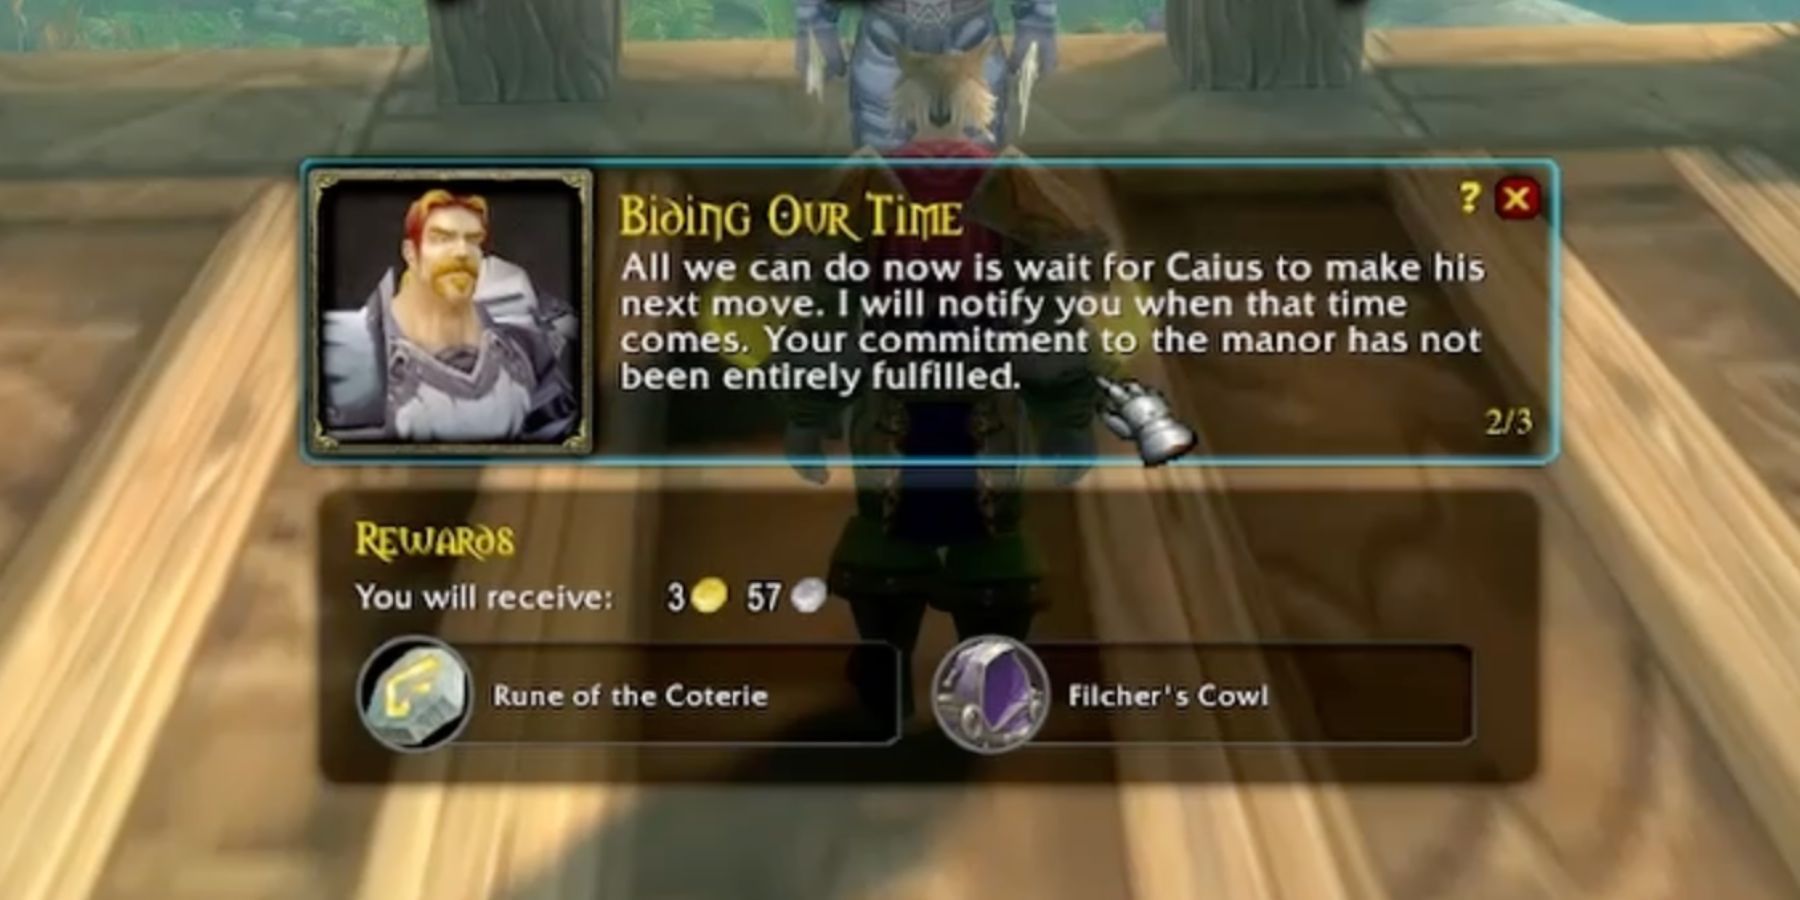 The Biding Our Time quest description in World of Warcraft Season of Discovery